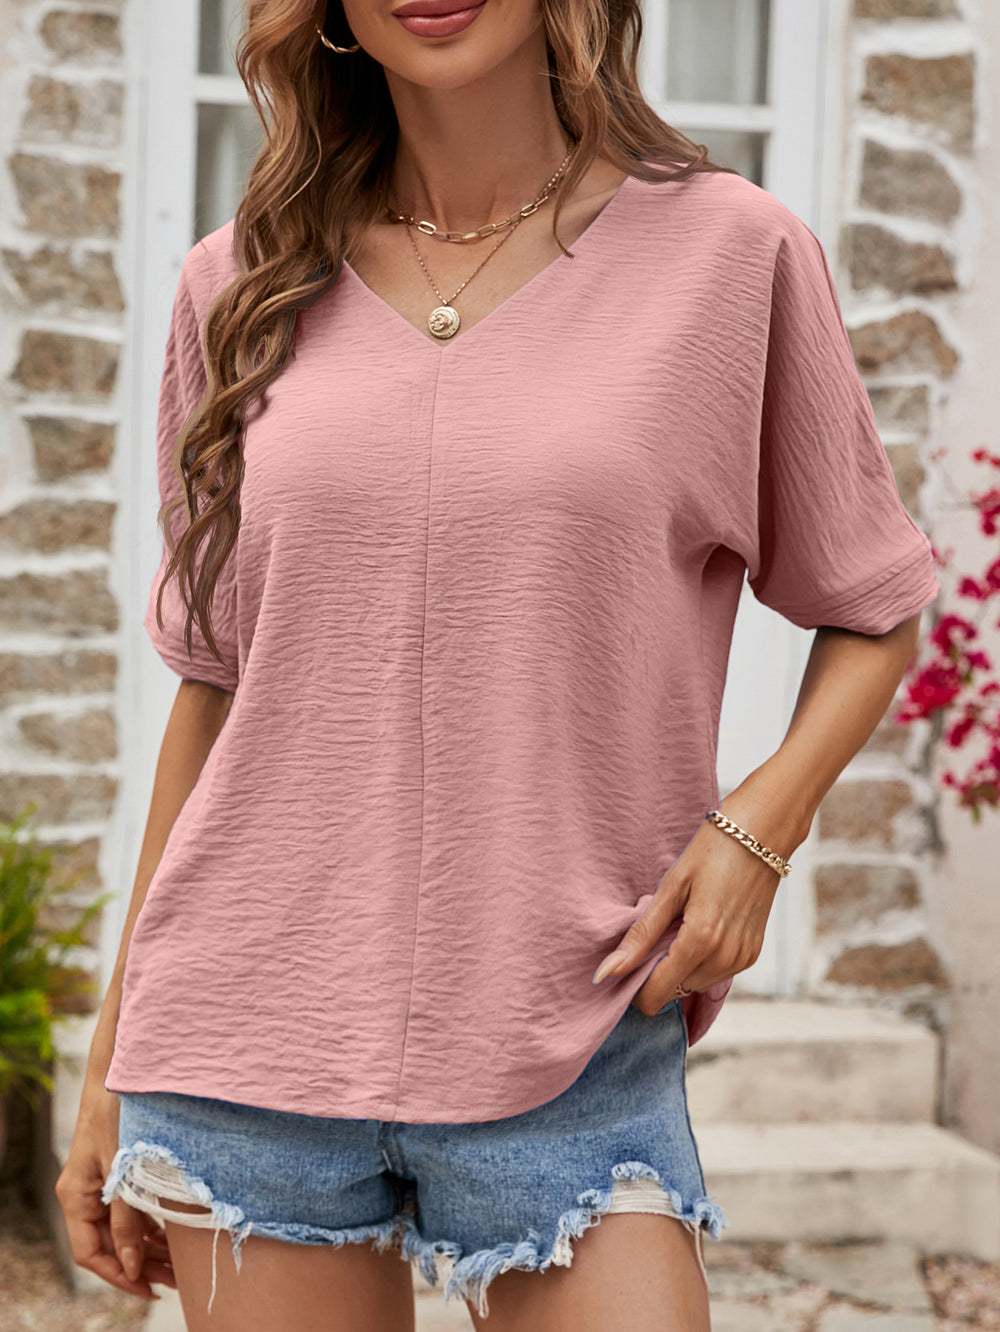 Women Clothing Summer Solid Color V neck Short Sleeved Casual Top T shirt Women